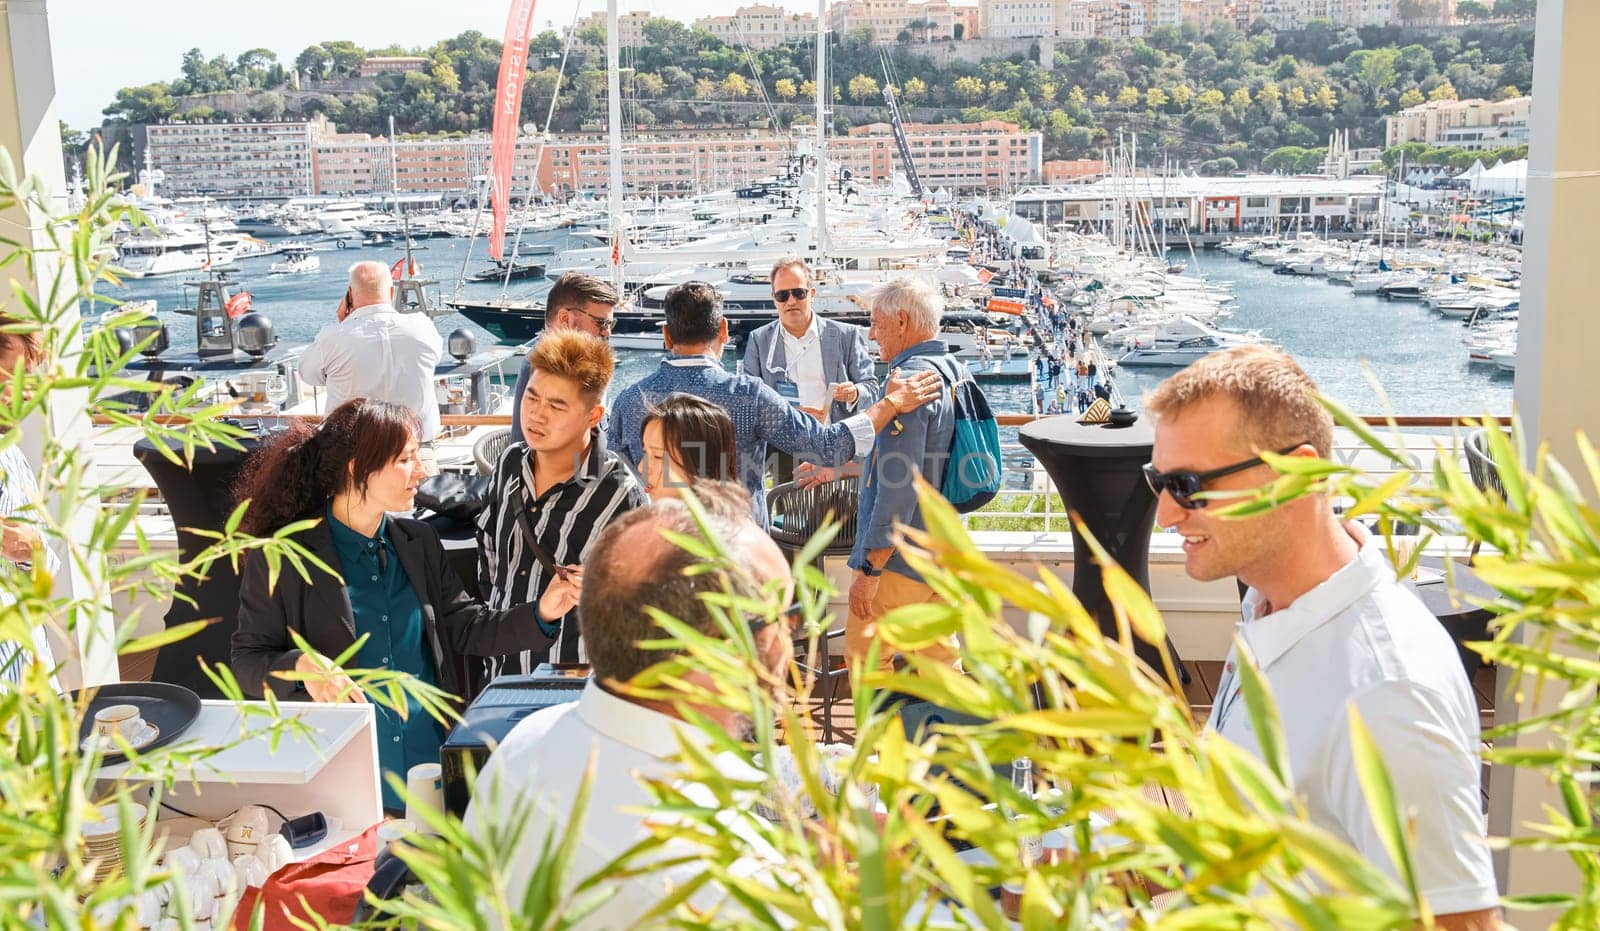 Monaco, Monte Carlo, 29 September 2022 - a lot of people, clients and yacht brokers look at the mega yachts presented, discuss the novelties of the boating industry at the famous motorboat exhibition by vladimirdrozdin